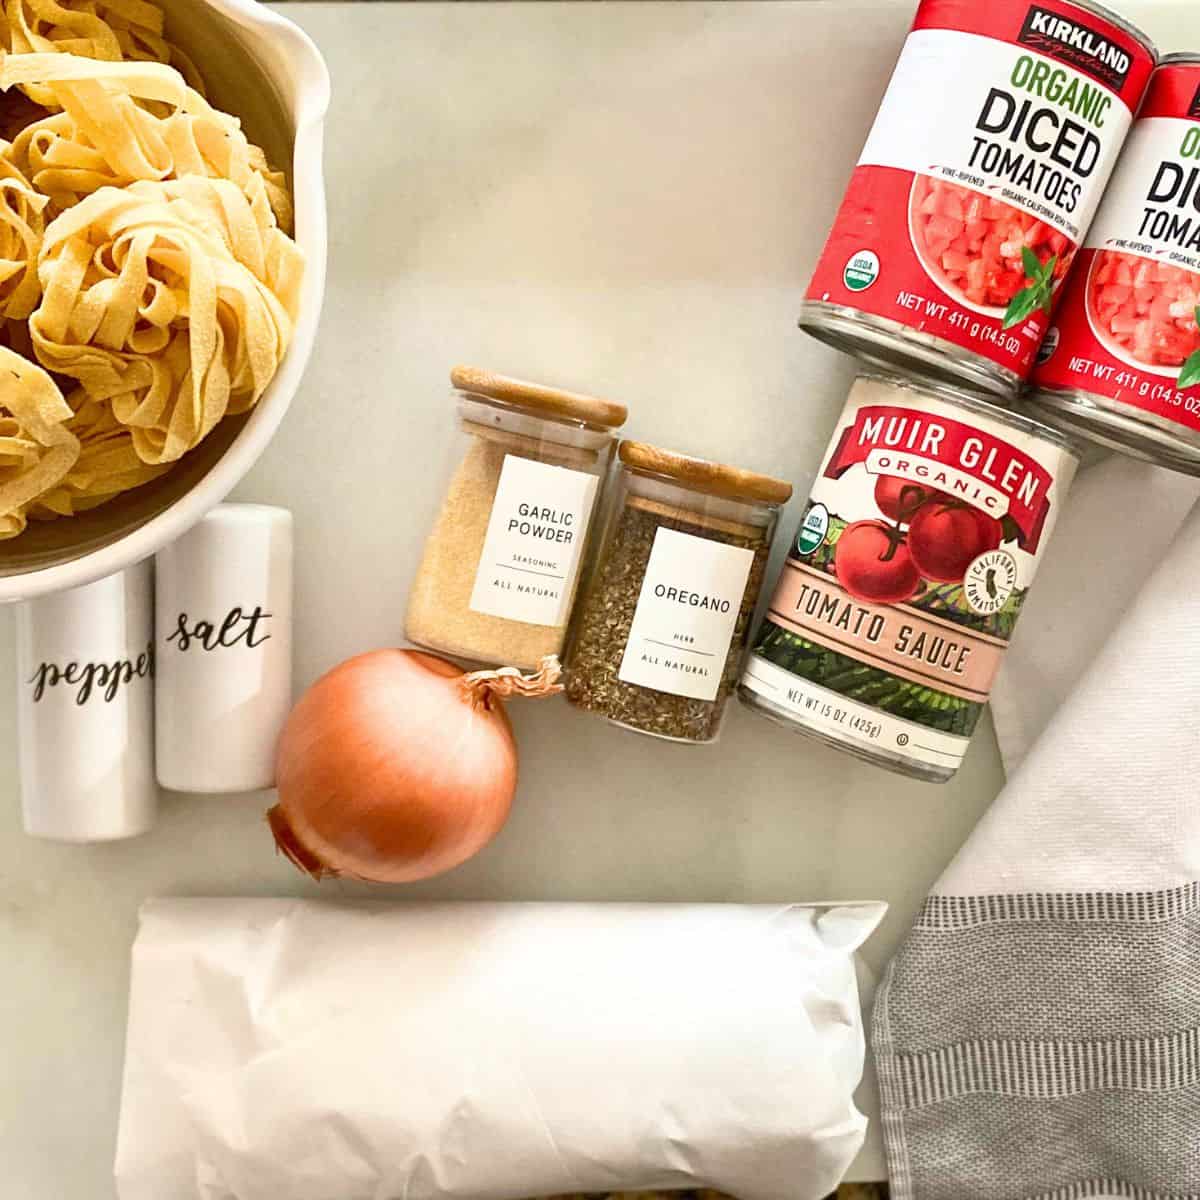 Ingredients for fettuccine with tomato sauce